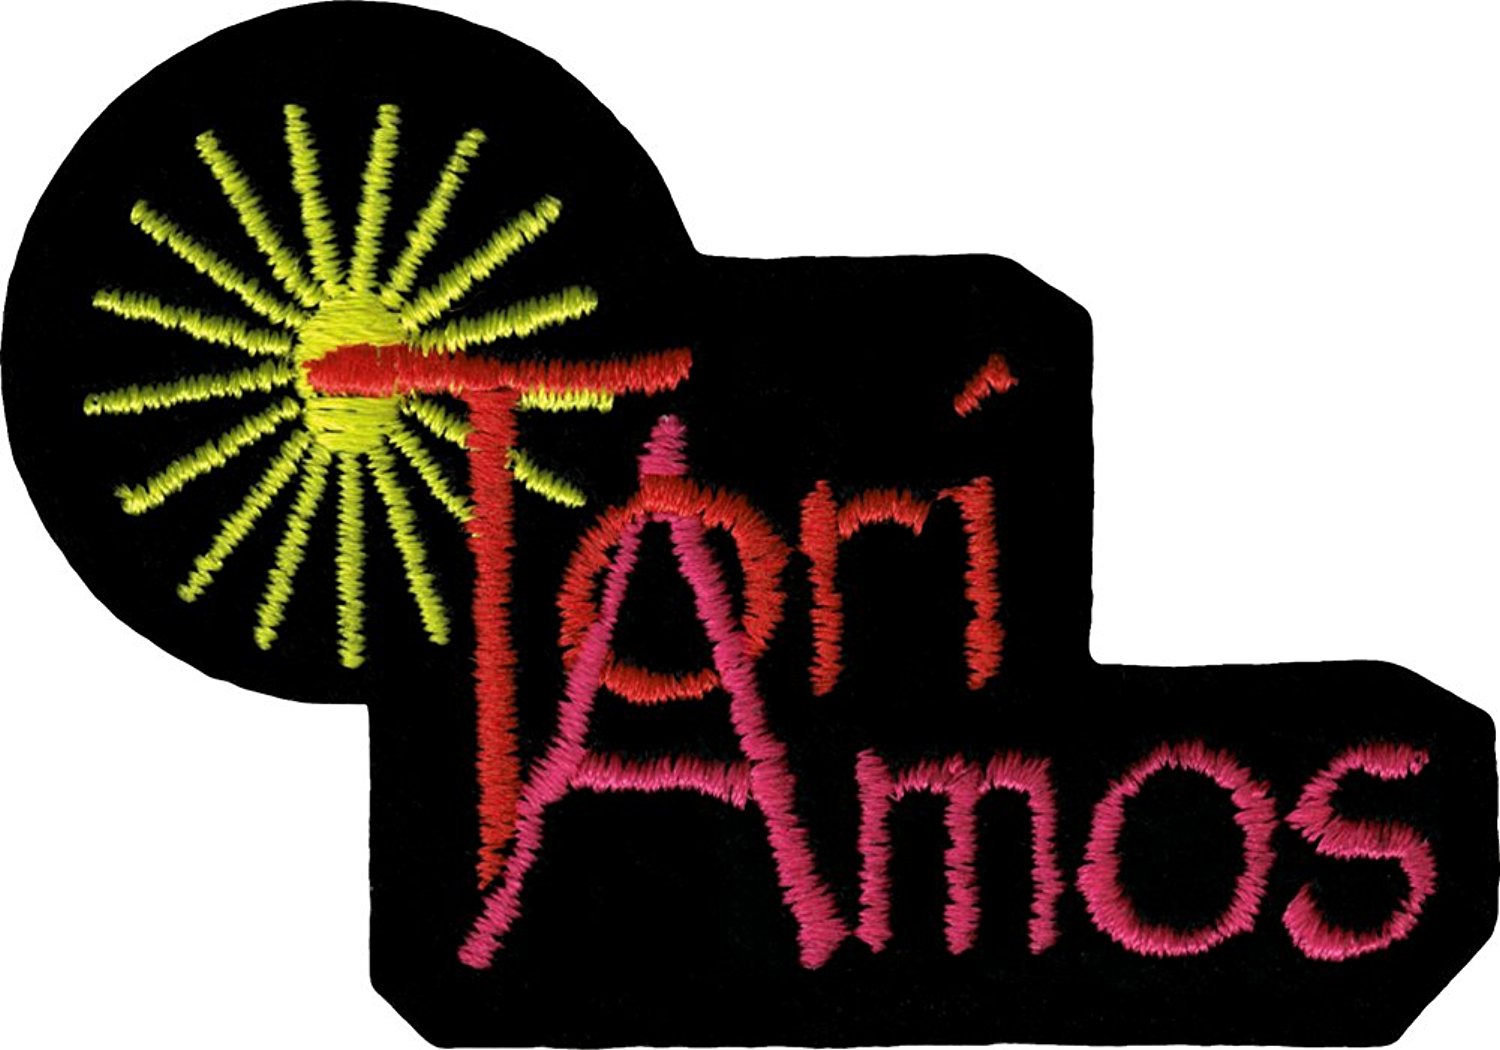 Amazon.com: Tori Amos Embroidered Iron On or Sew On Patch: Clothing